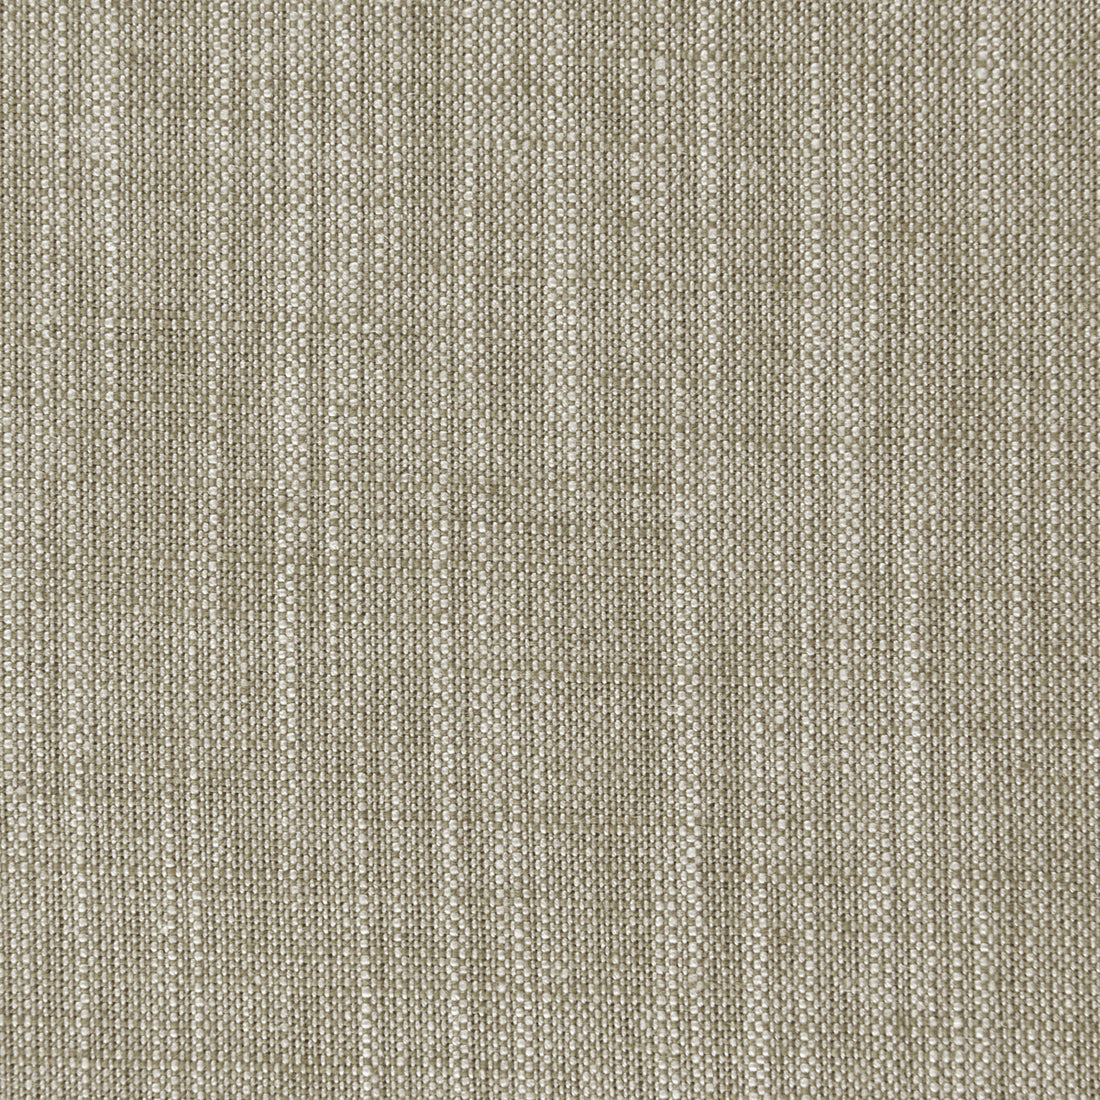 Biarritz fabric in nougat color - pattern F0965/31.CAC.0 - by Clarke And Clarke in the Clarke &amp; Clarke Biarritz collection